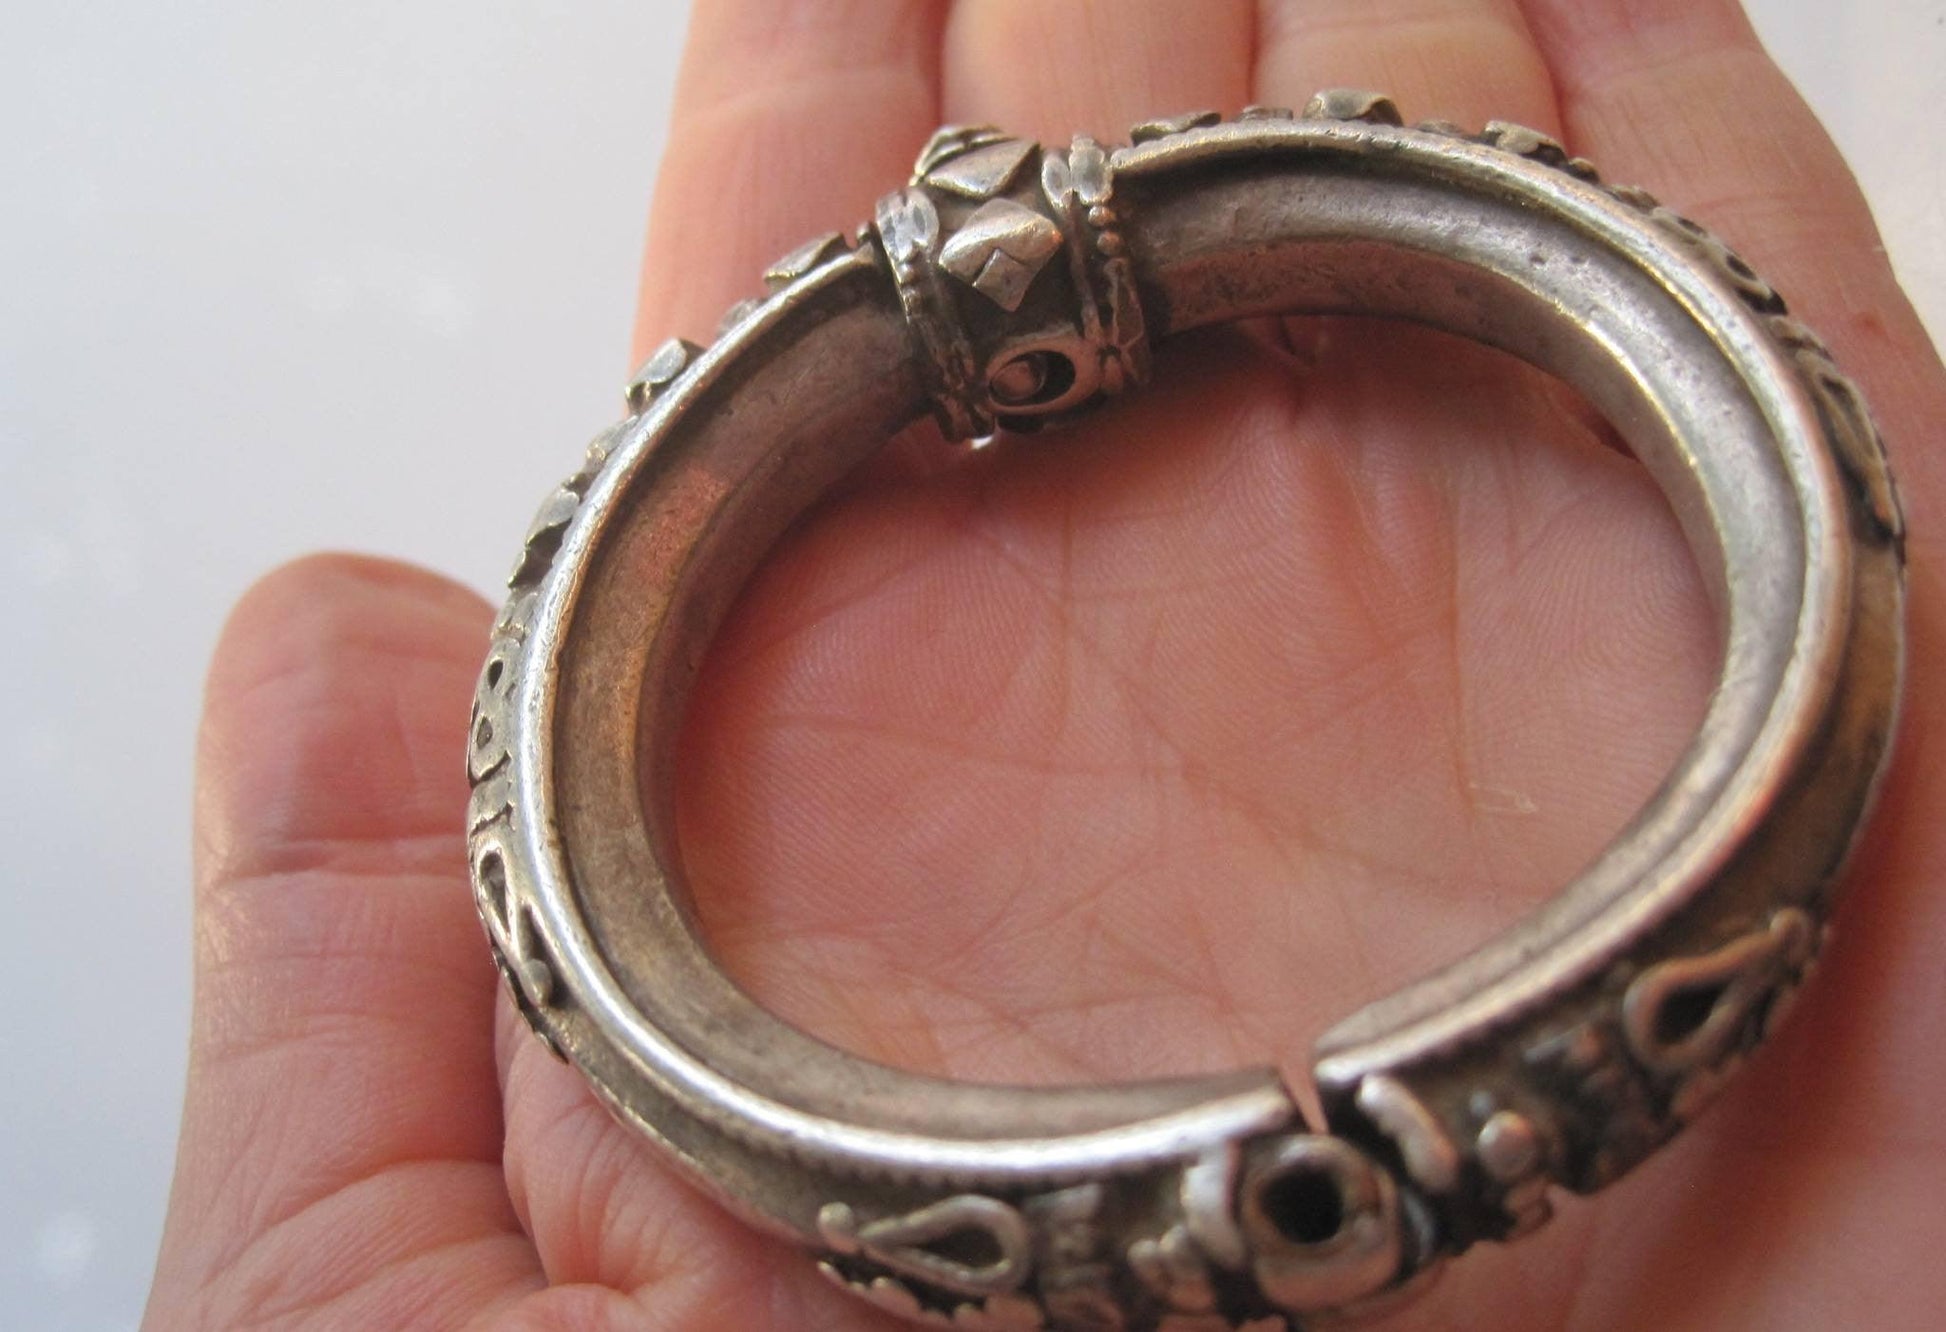 Antique Indian Silver Bracelet for Small Wrist - Anteeka